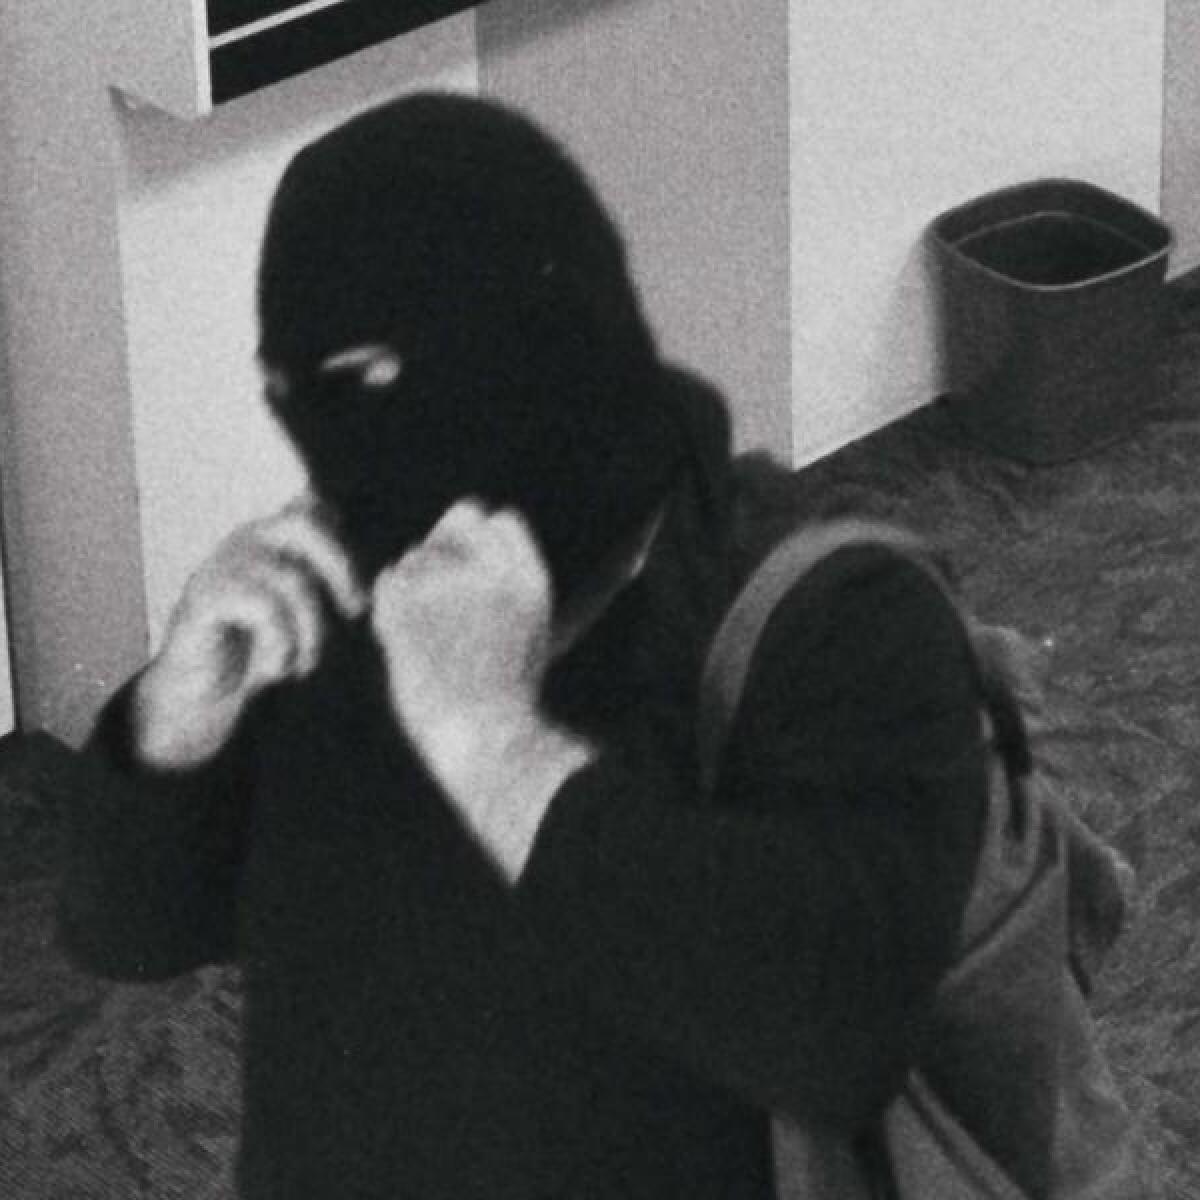 An image of the Bicycle Bandit.